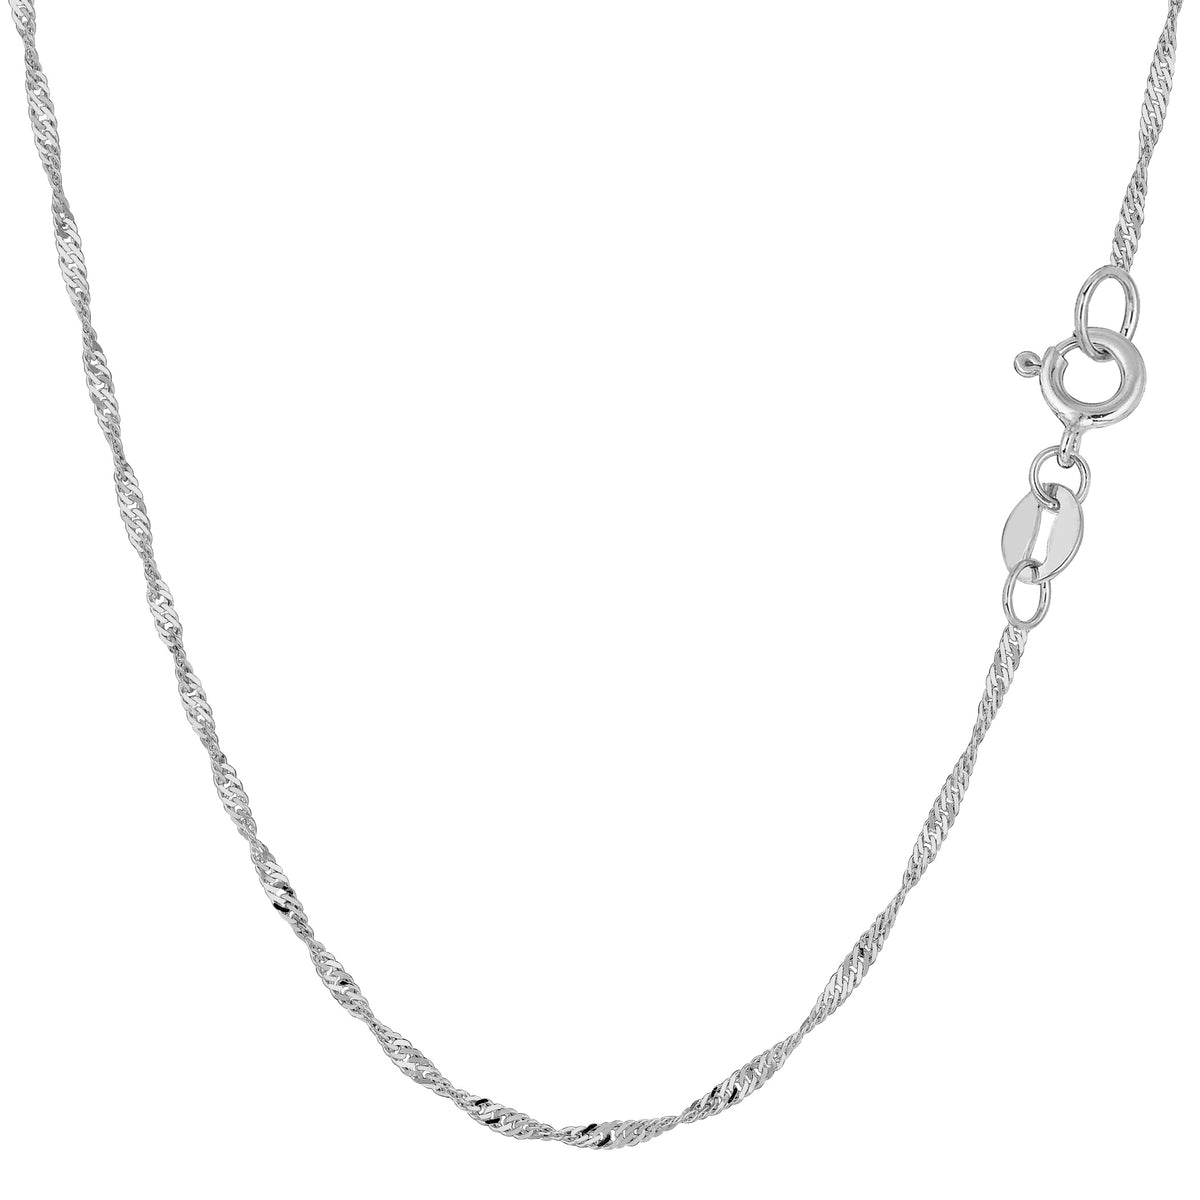 14k White Gold Singapore Chain Necklace, 1.5mm fine designer jewelry for men and women